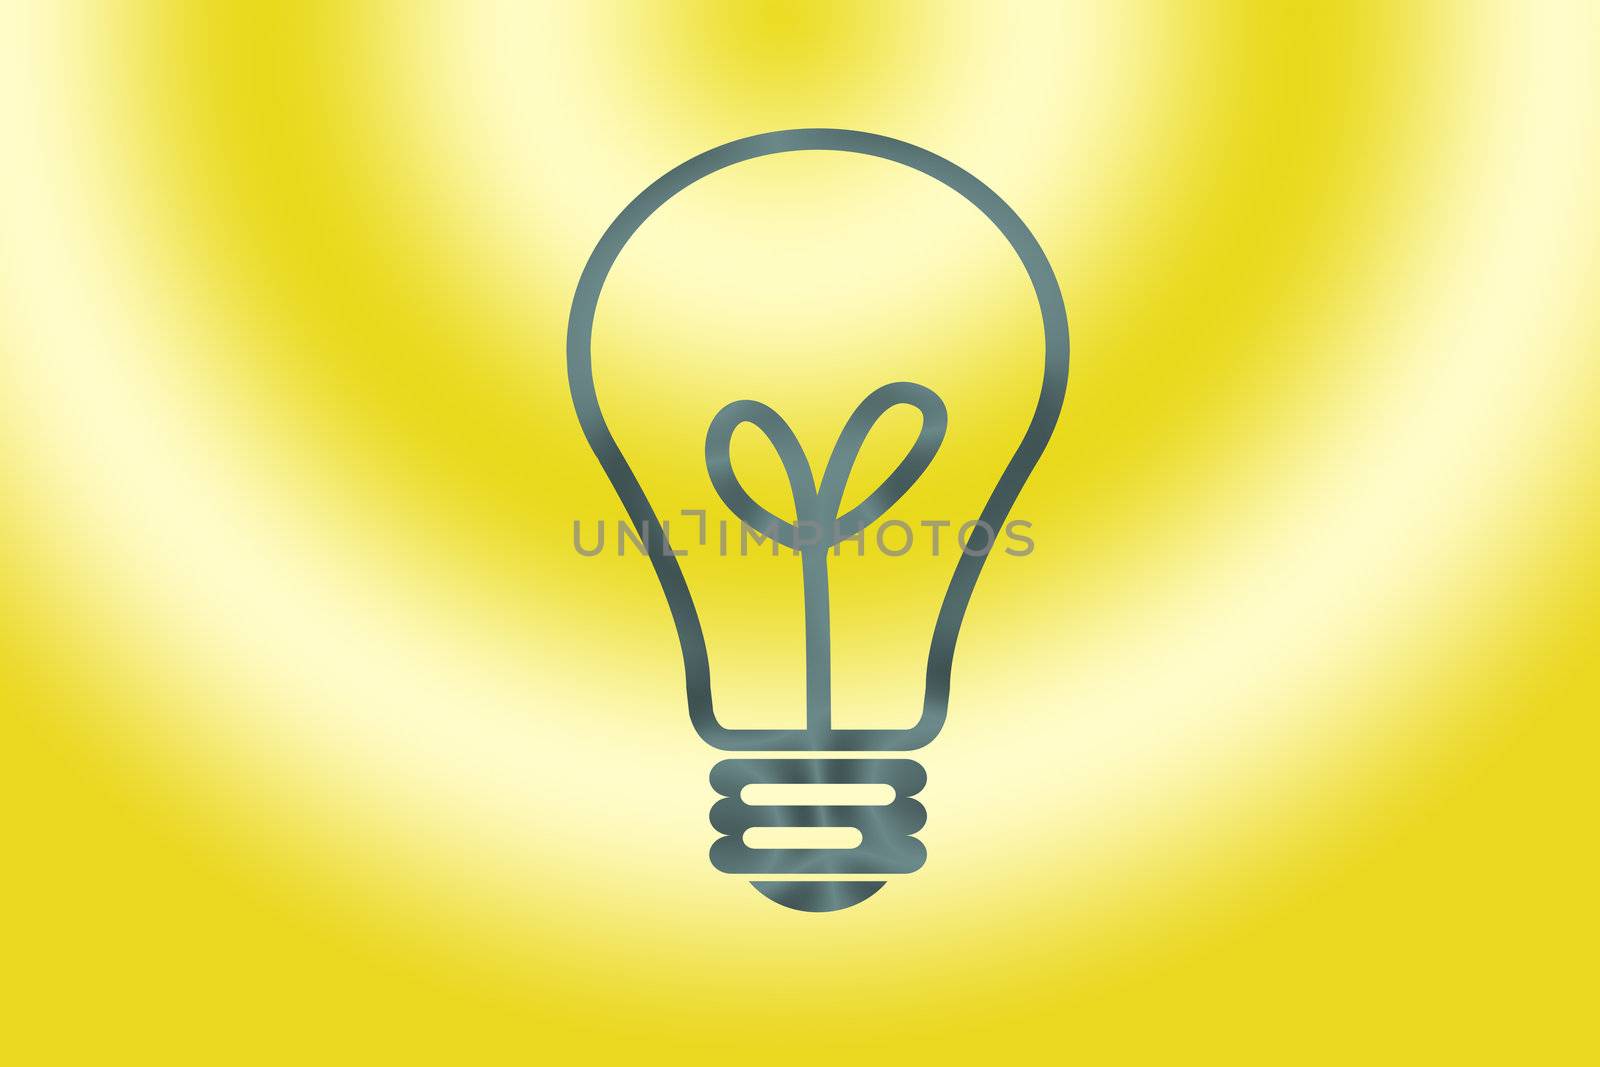  light bulb with background
